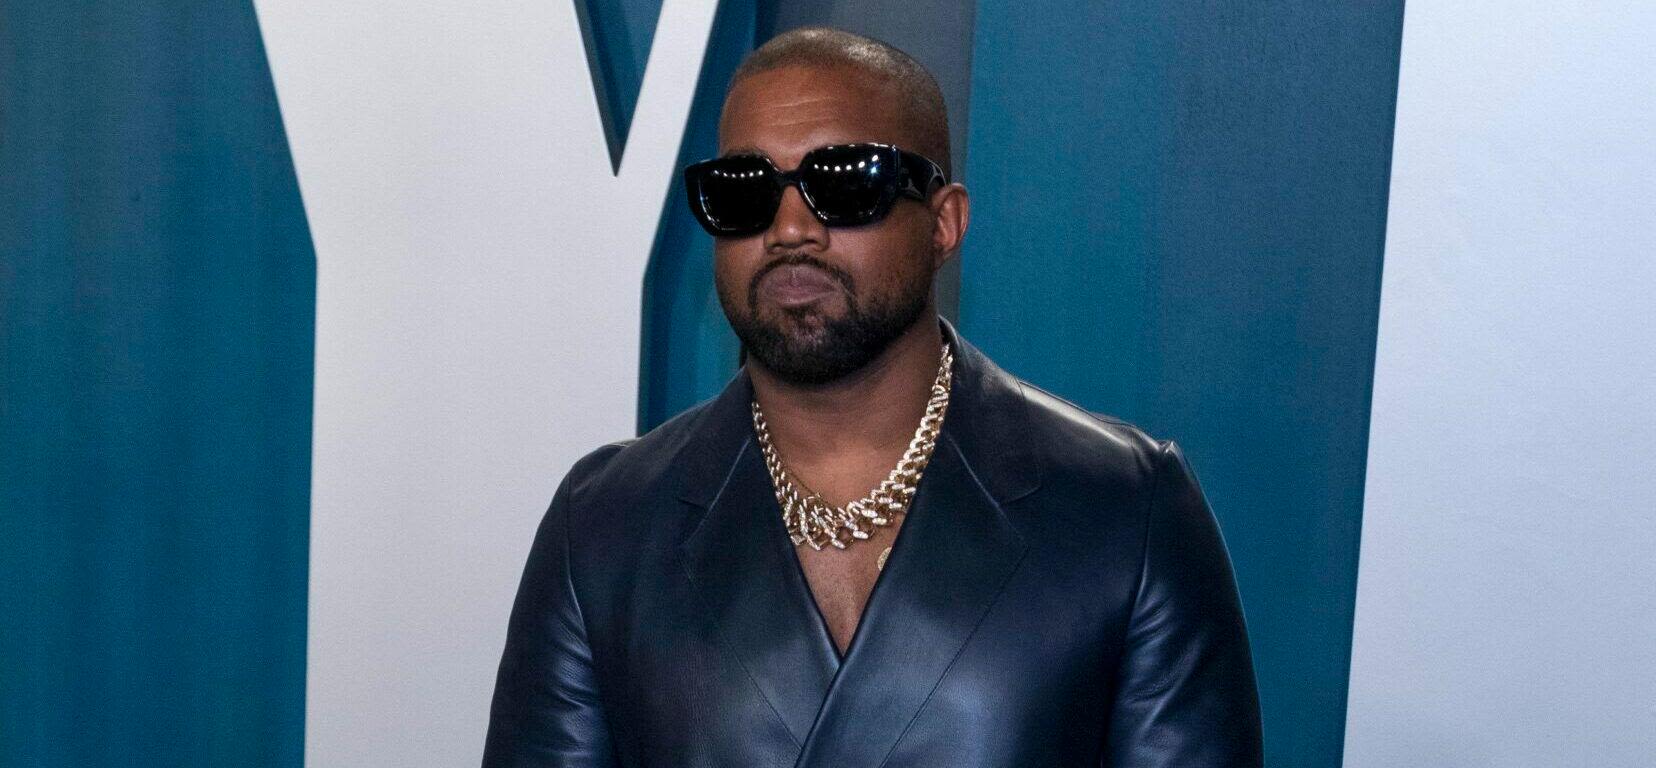 Kanye West Slams Former Yeezy Employee's Sexual Harassment Suit As 'Baseless'